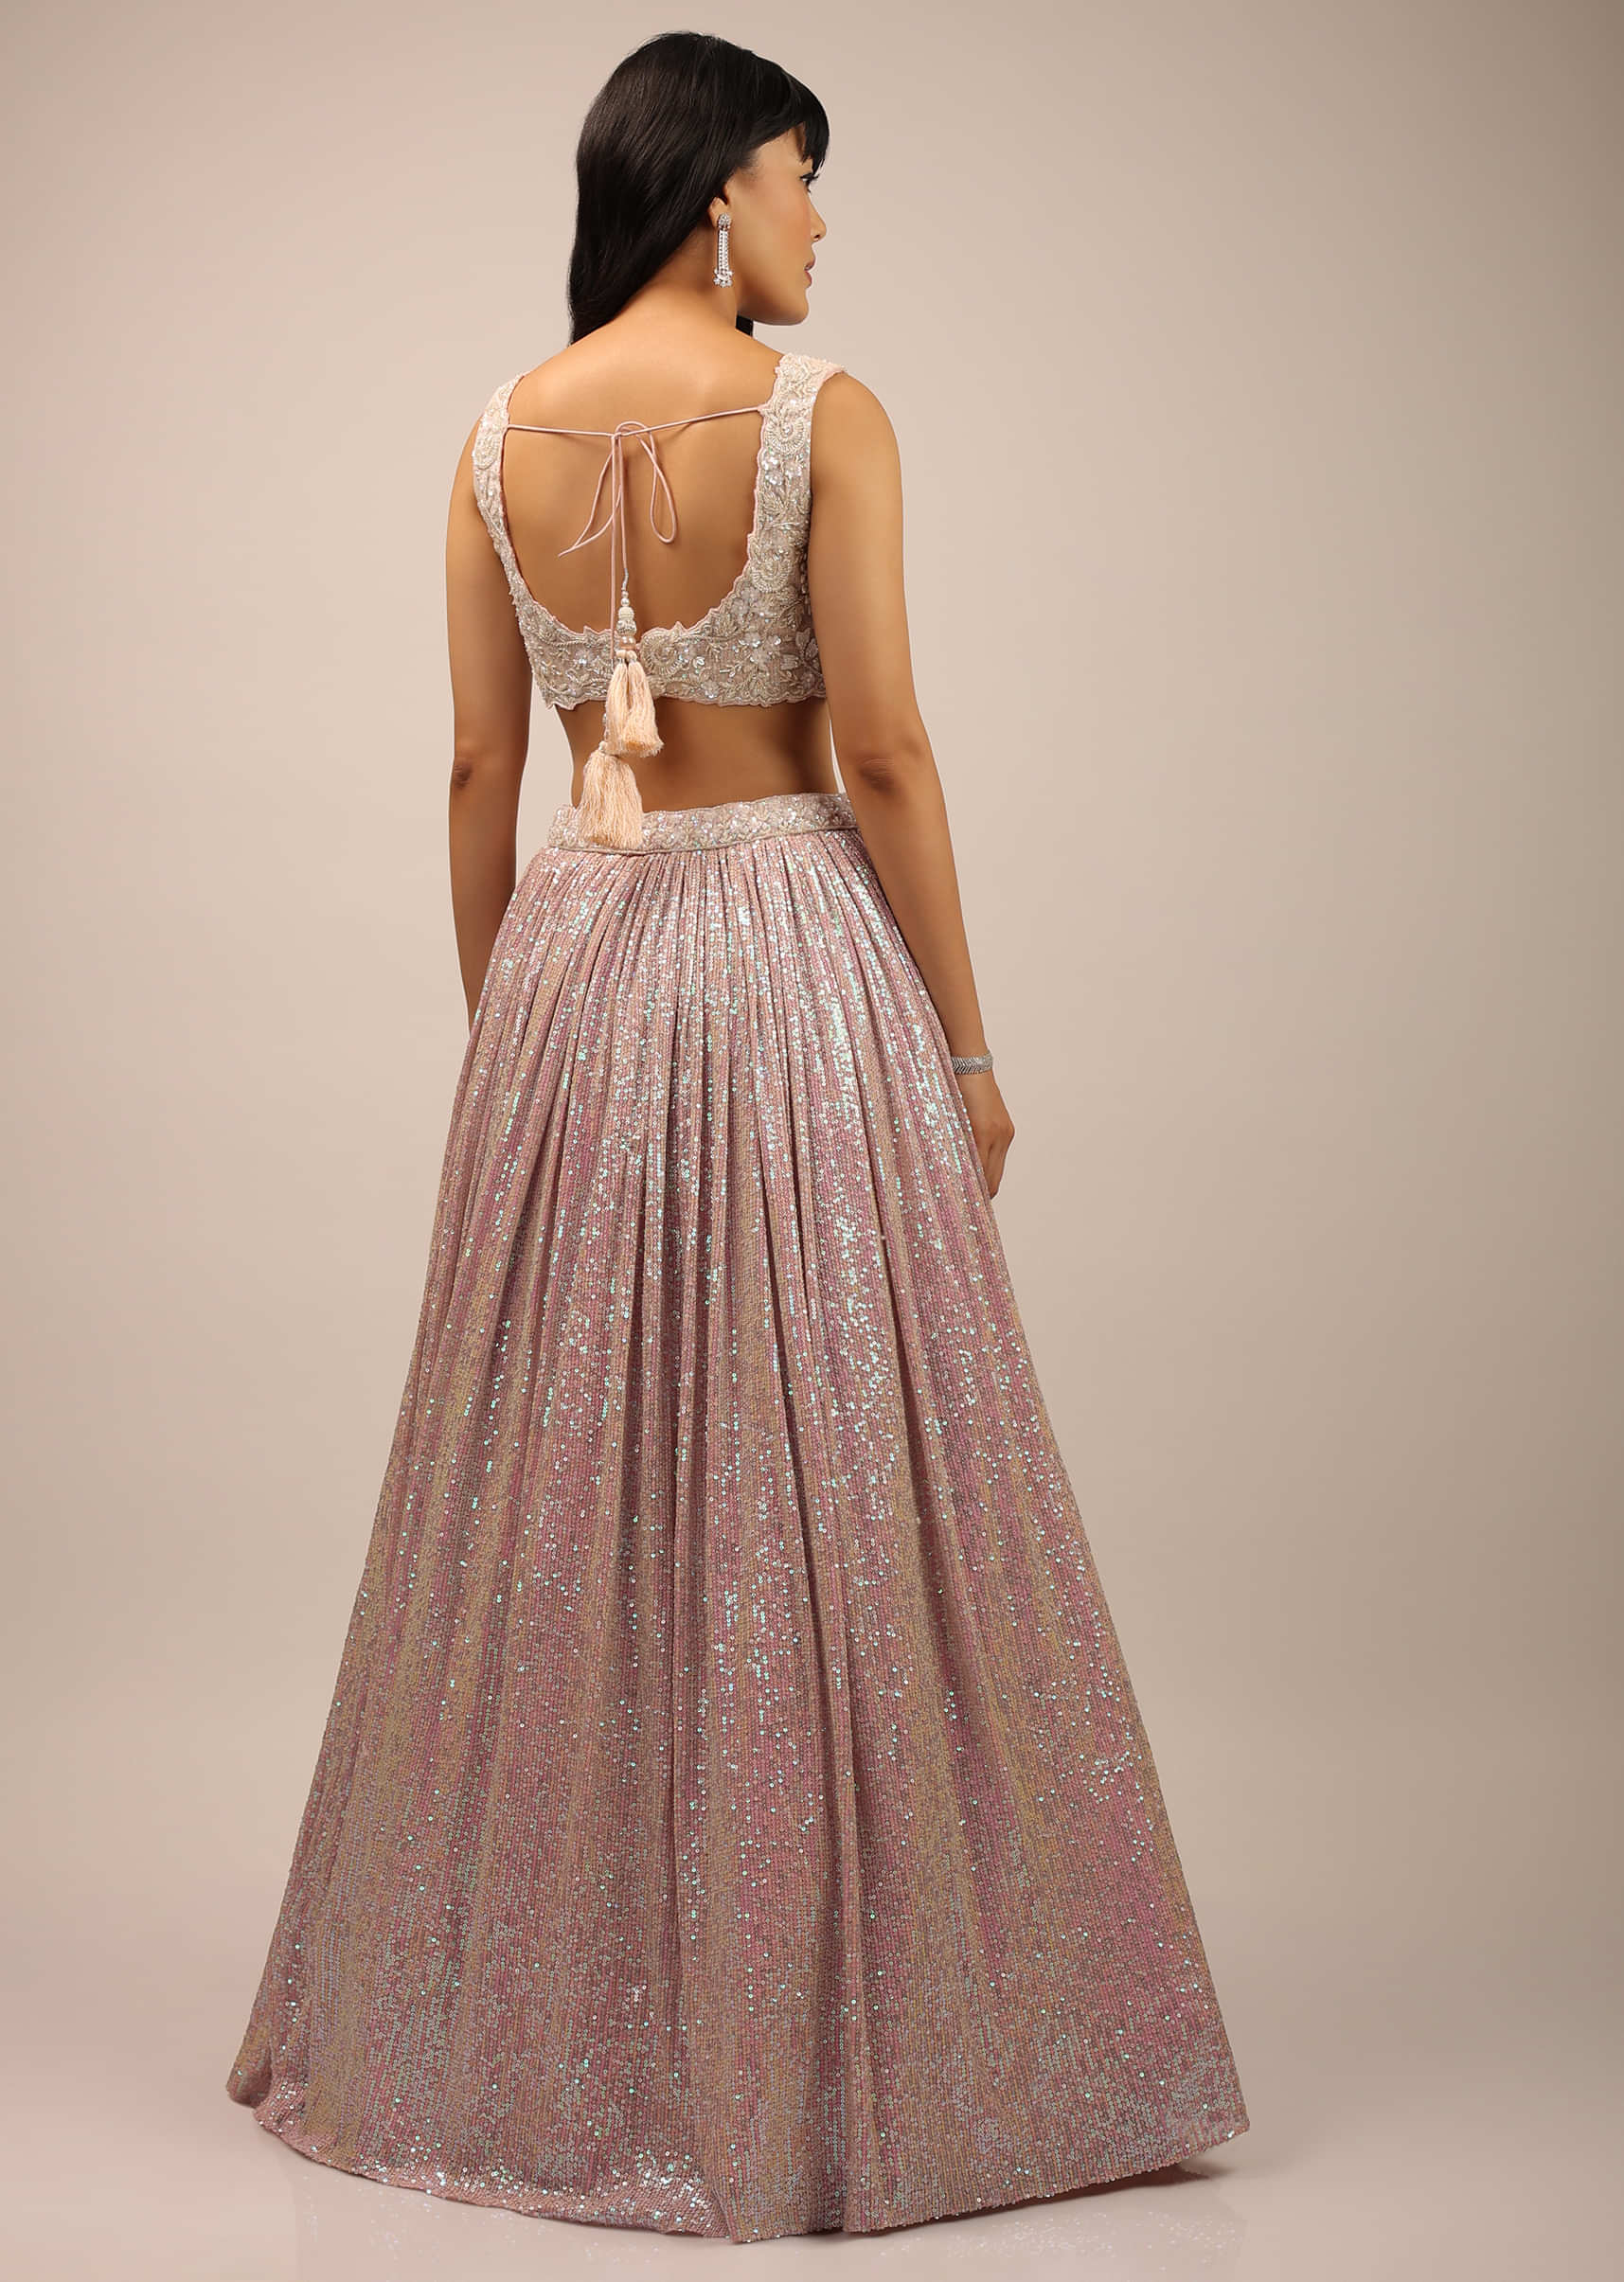 Blush Pink Crop Top And Pleated Skirt With Sequins 